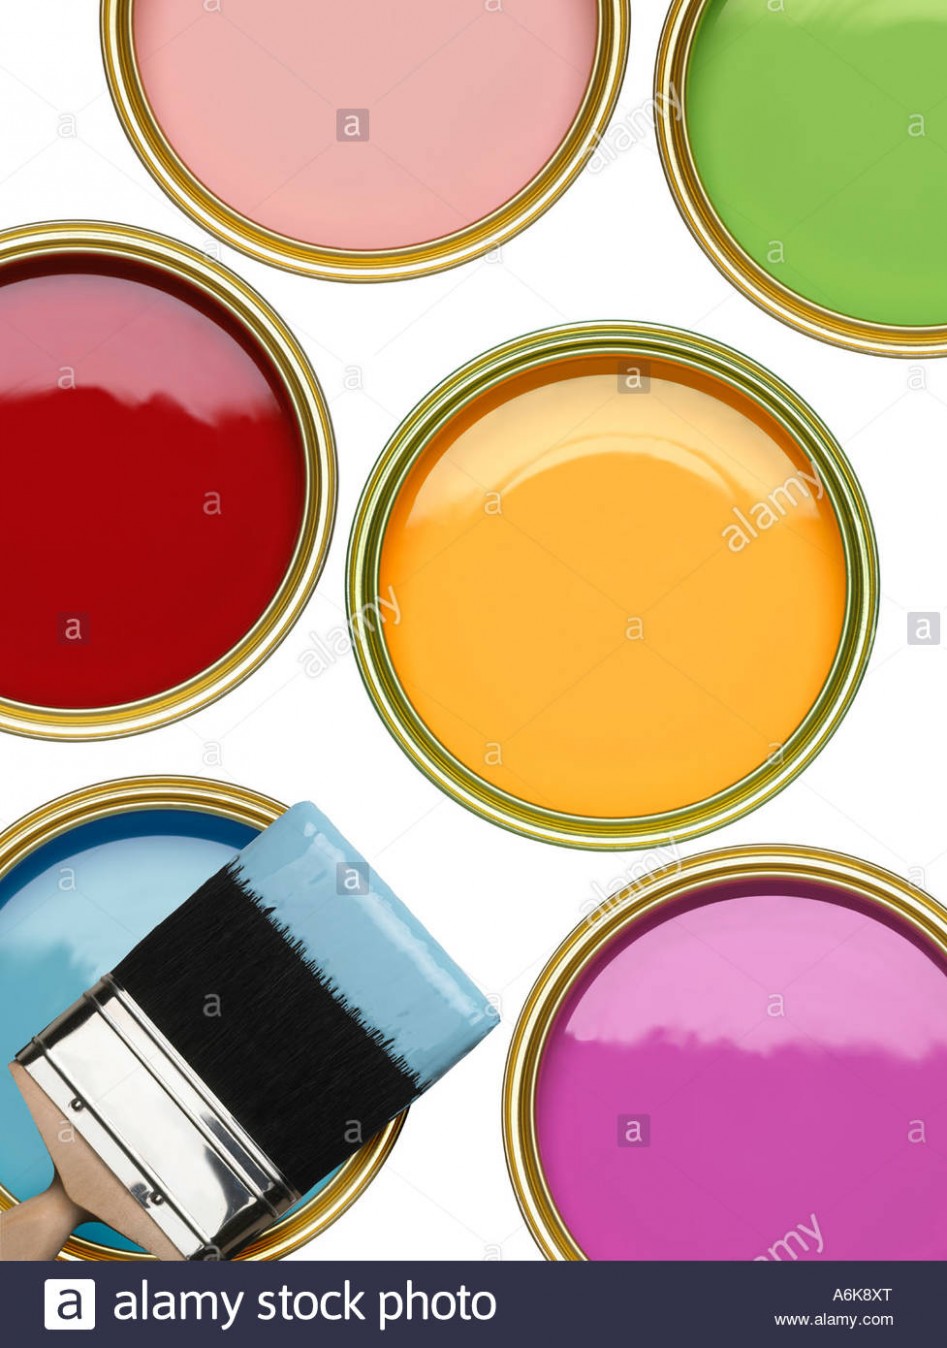 Tins Of Blue Green Pink Red Yellow And Purple Paint With Brush On ..